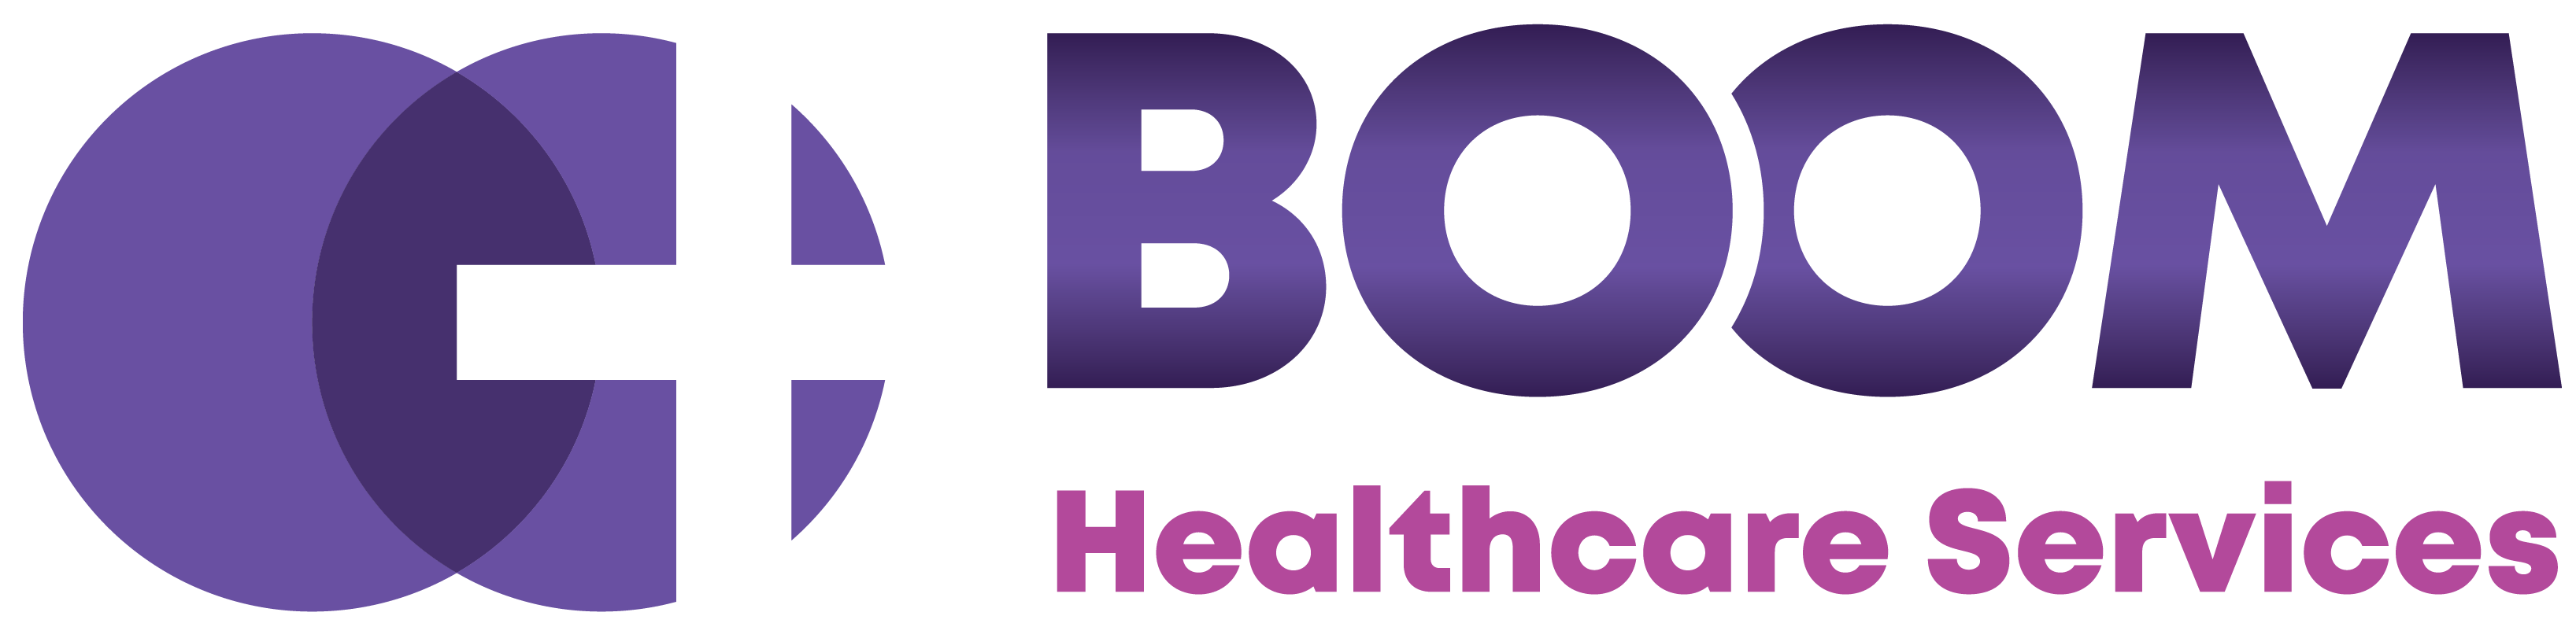 cropped-Boom-Healthcare-Services-logo-01.png